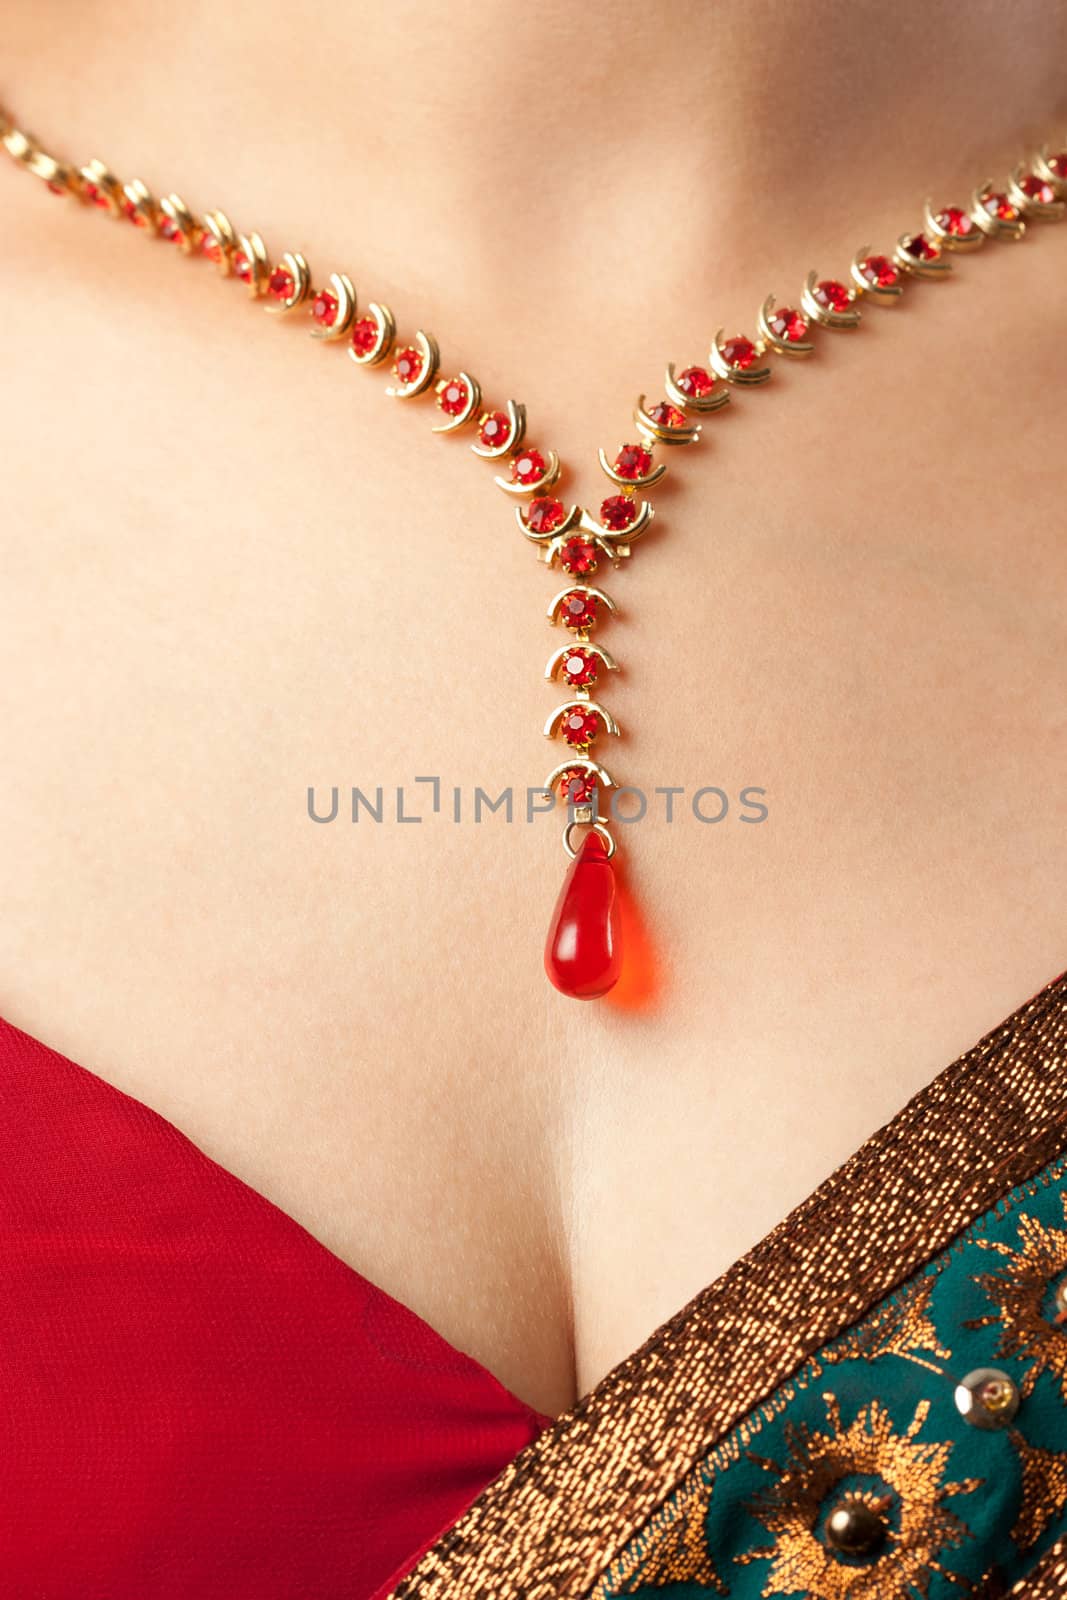 Close up of necklace over female body skin